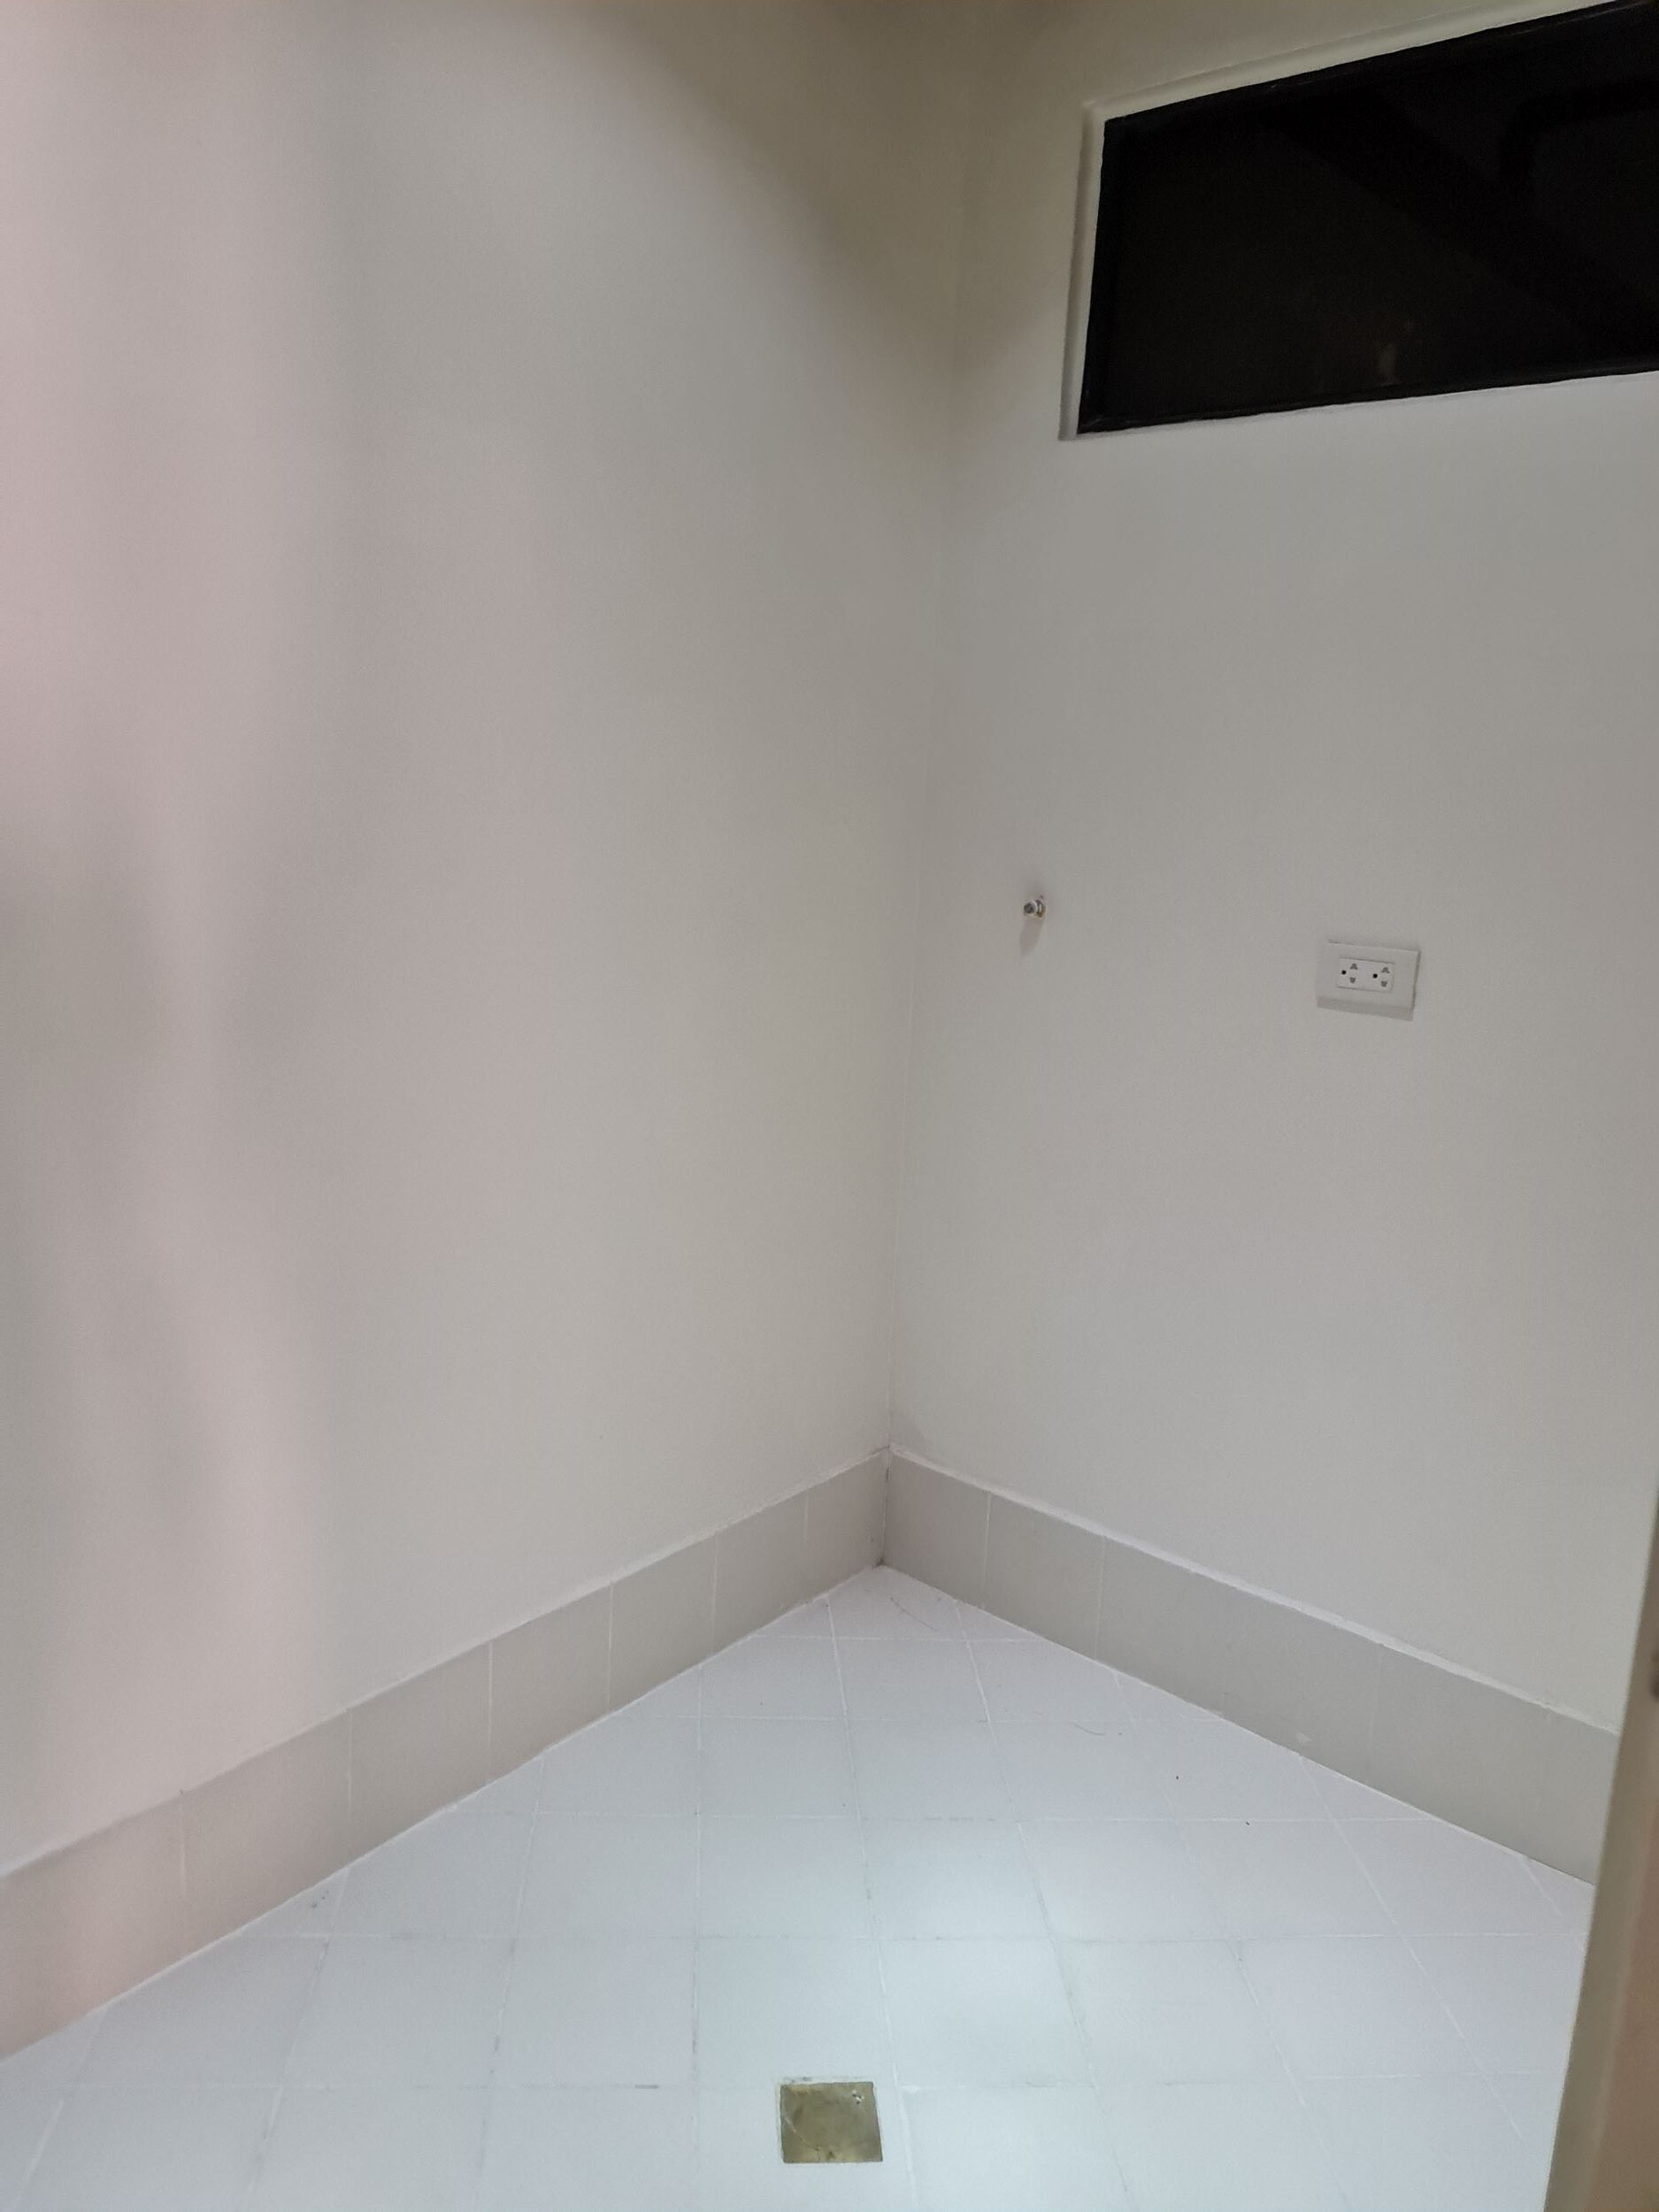 1 Bedroom Eastwood City Condo with Parking